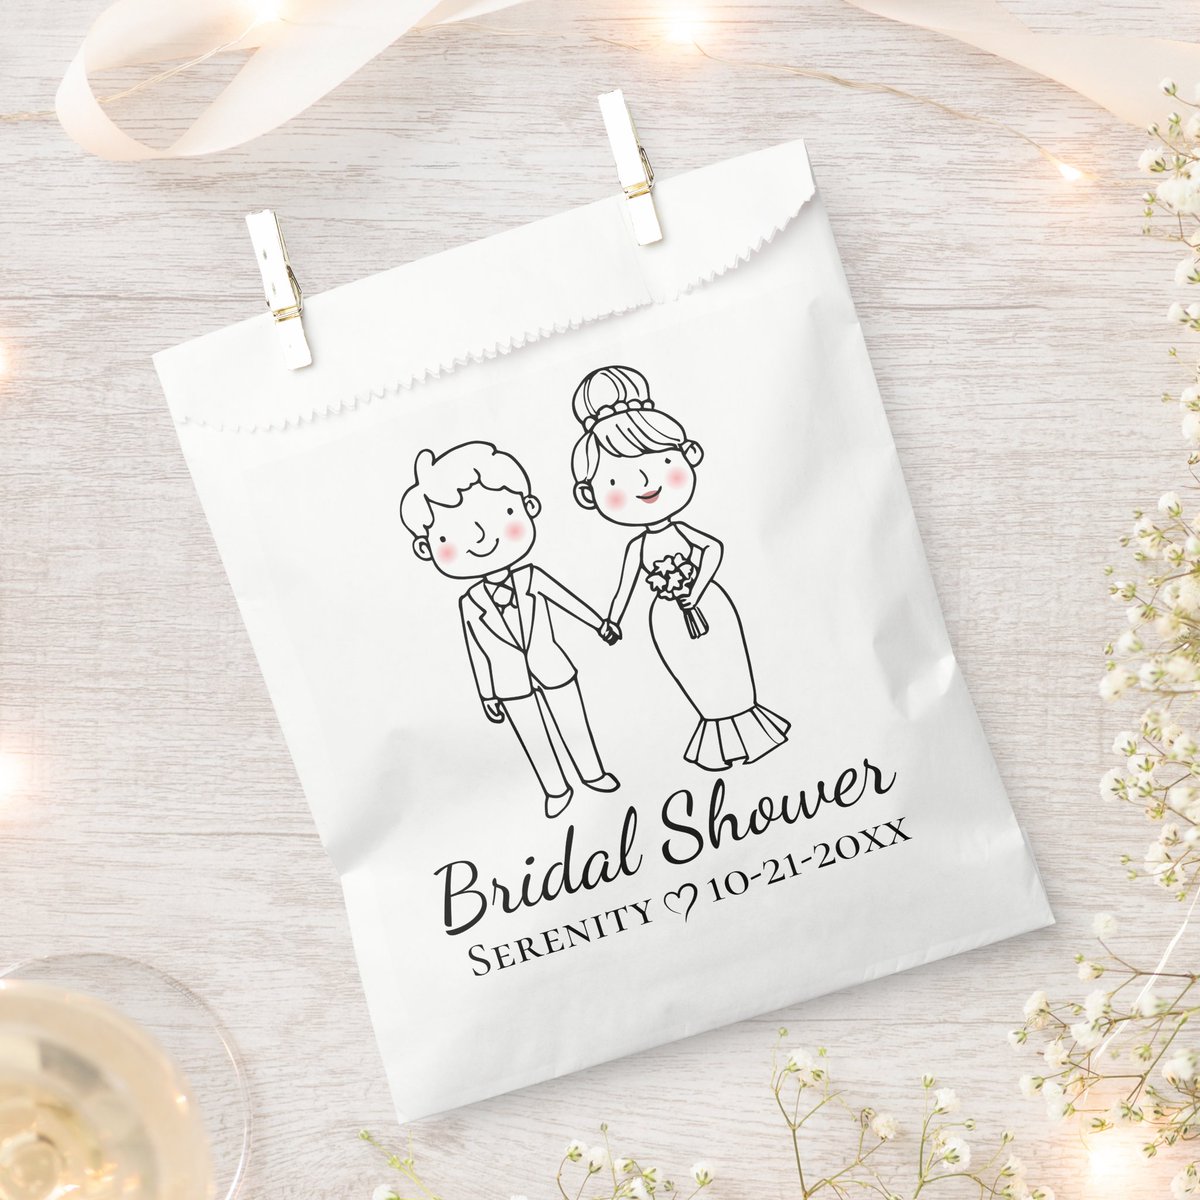 Cherish the Love with this adorable Personalized Bridal Shower Favor Bags! Perfect for any season or theme, these bags feature a cute cartoon bride and groom that every bride will love. zazzle.com/z/z8xnz9nx?rf=… 💖 #BridalShower #WeddingFavors #LoveIsInTheAir”